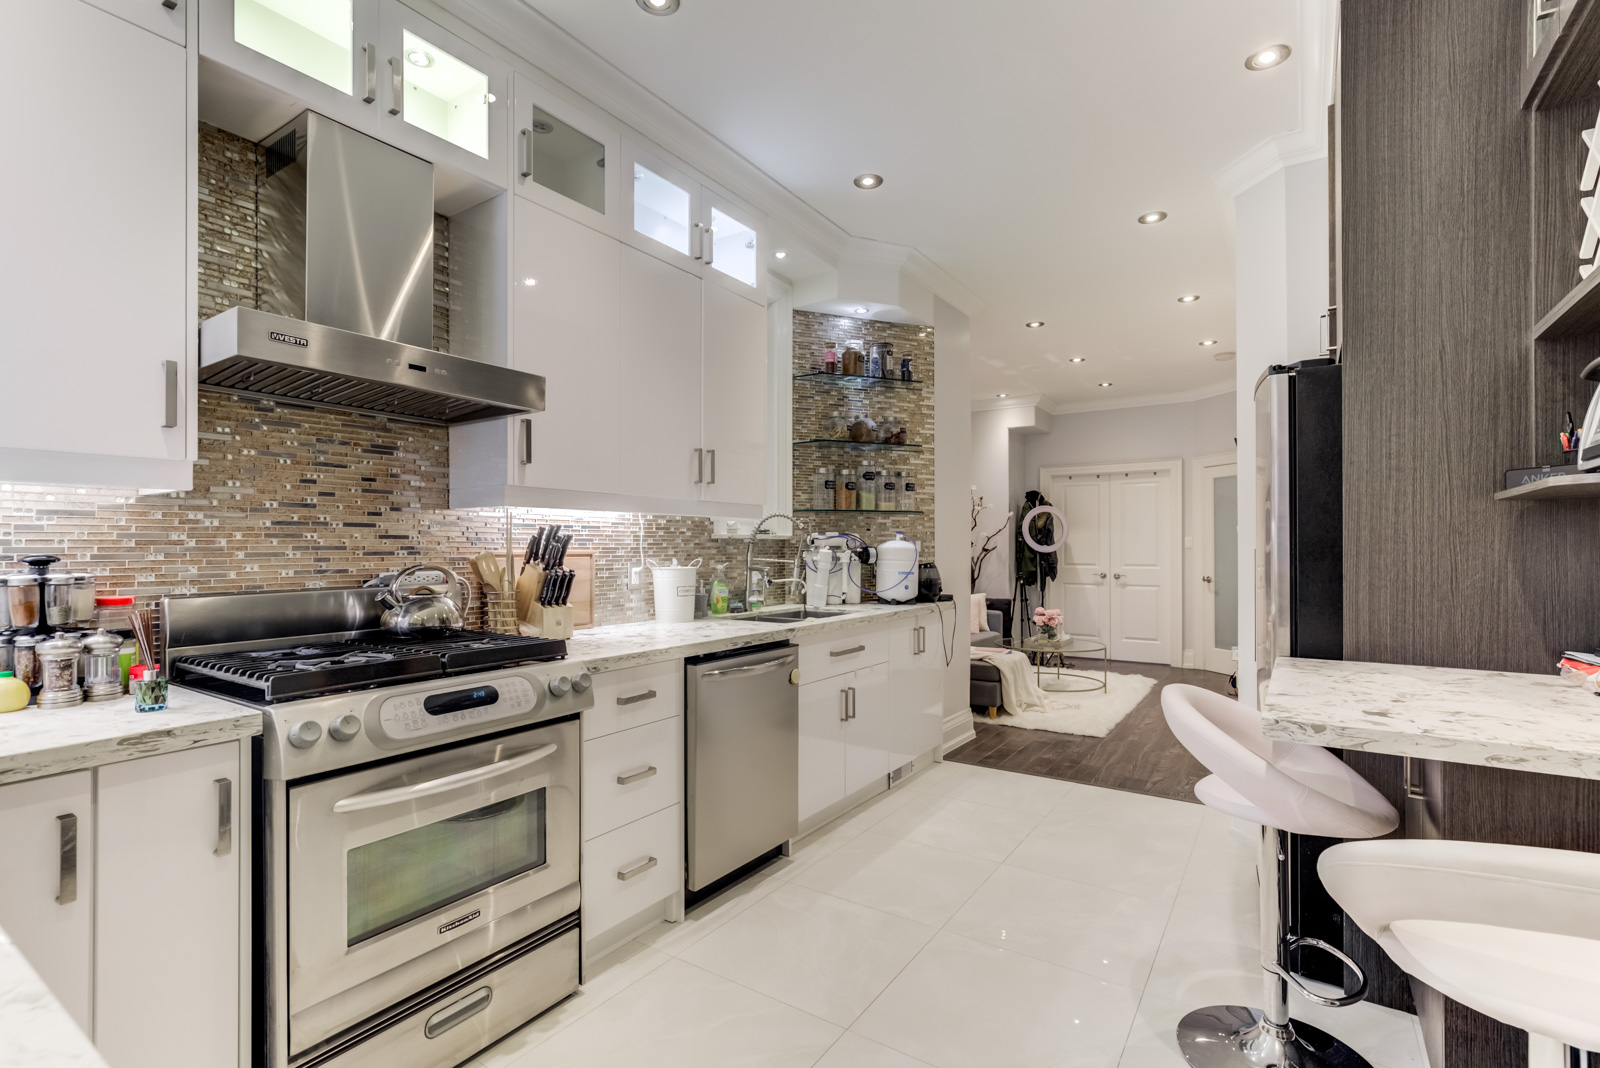 Gorgeous renovated kitchen with modern appliances, shiny white cabinets and tiled backsplash.